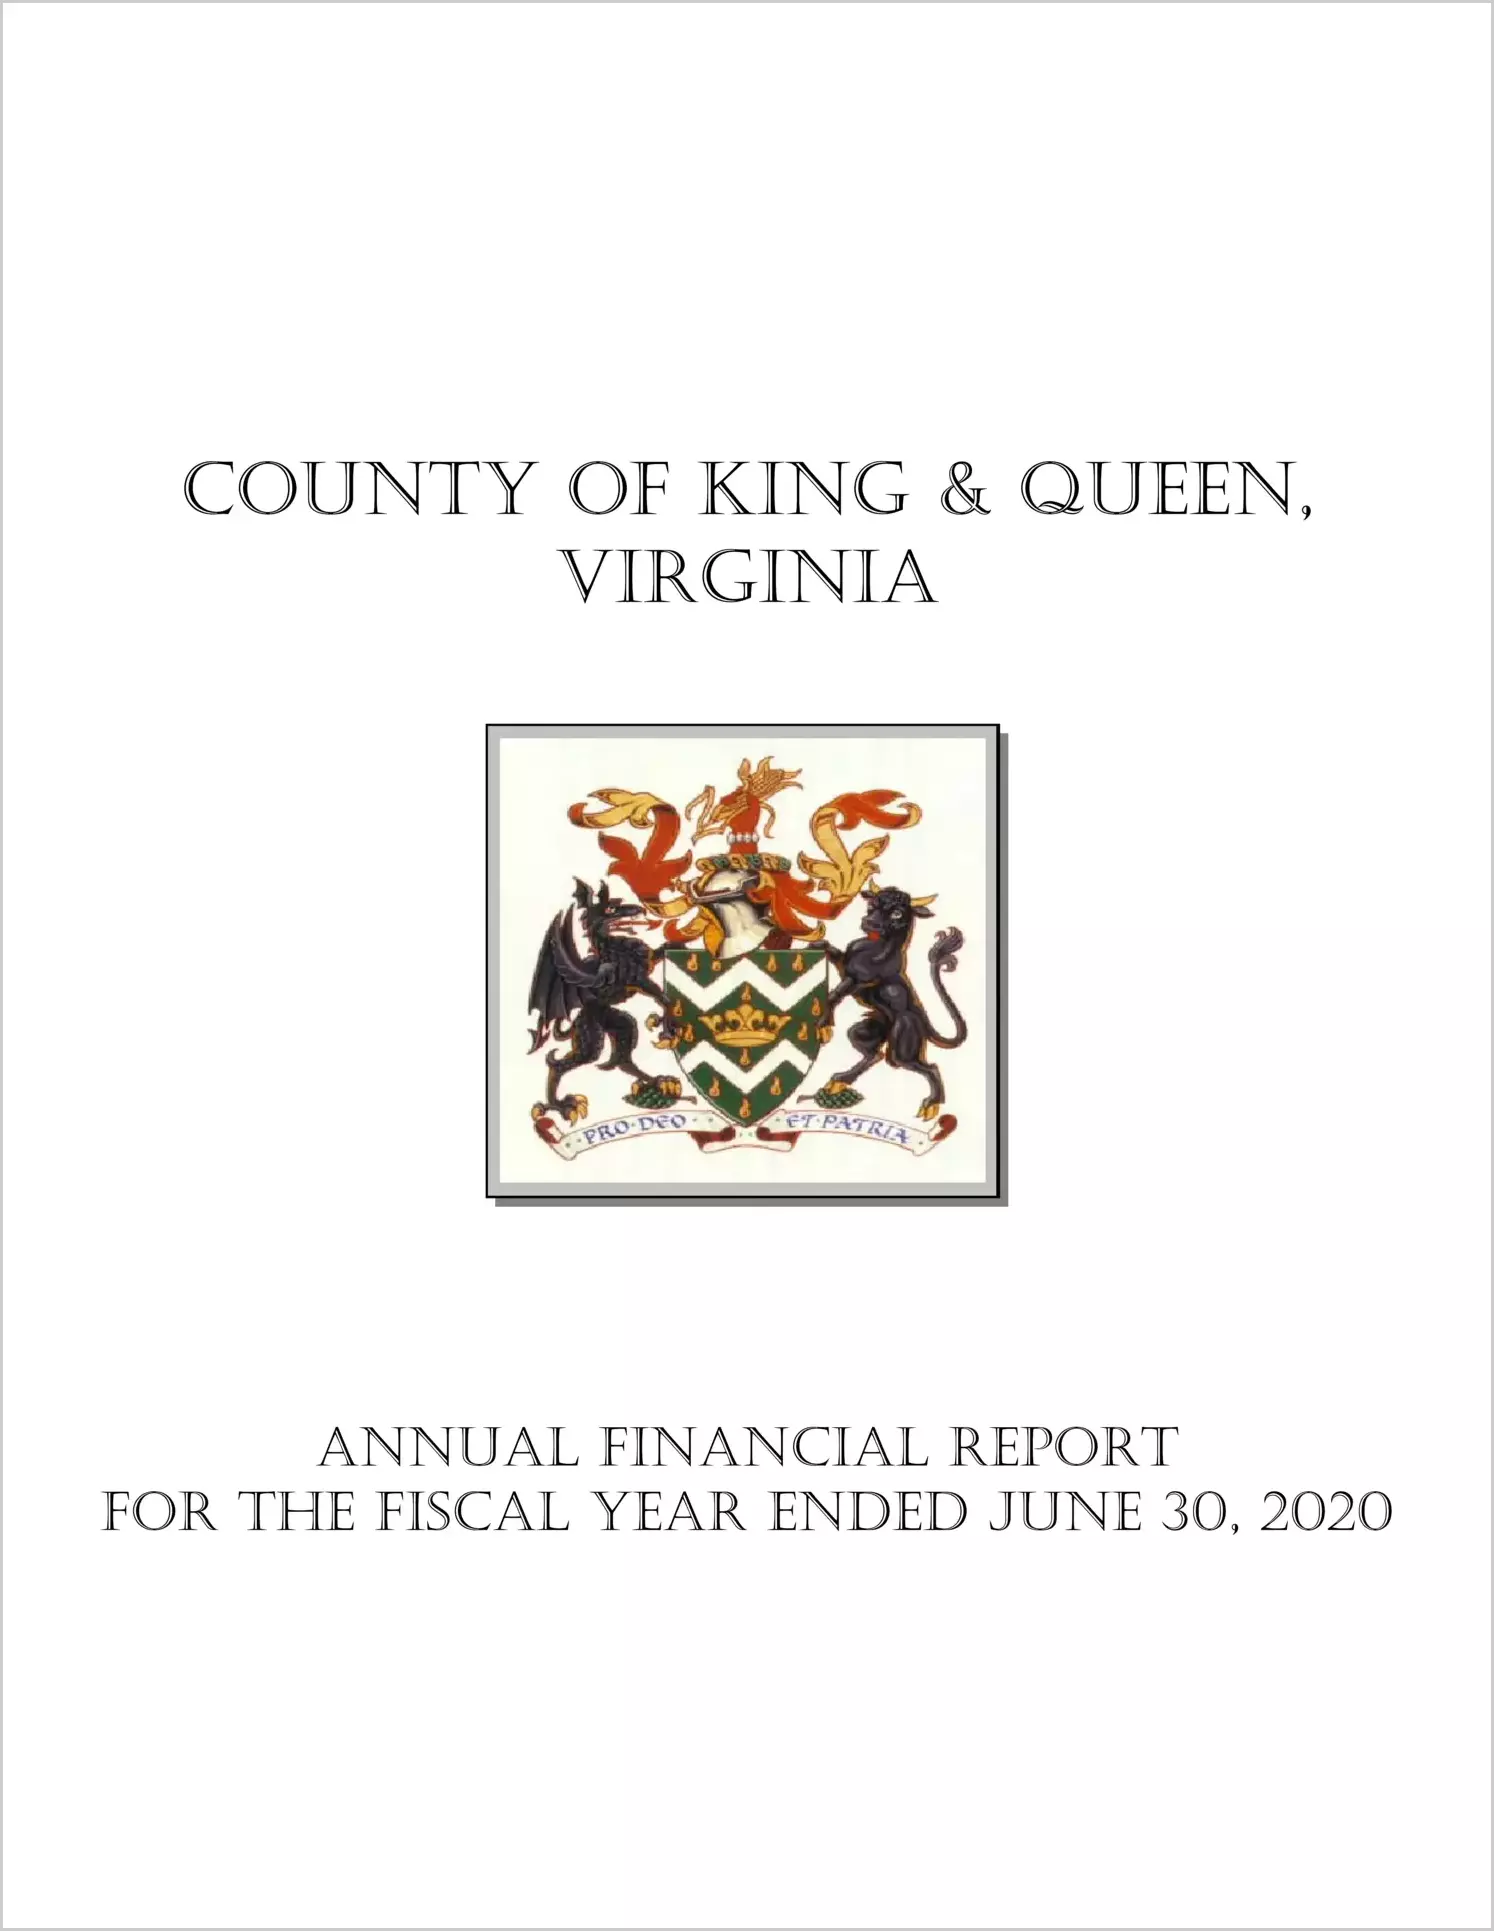 2020 Annual Financial Report for County of King and Queen